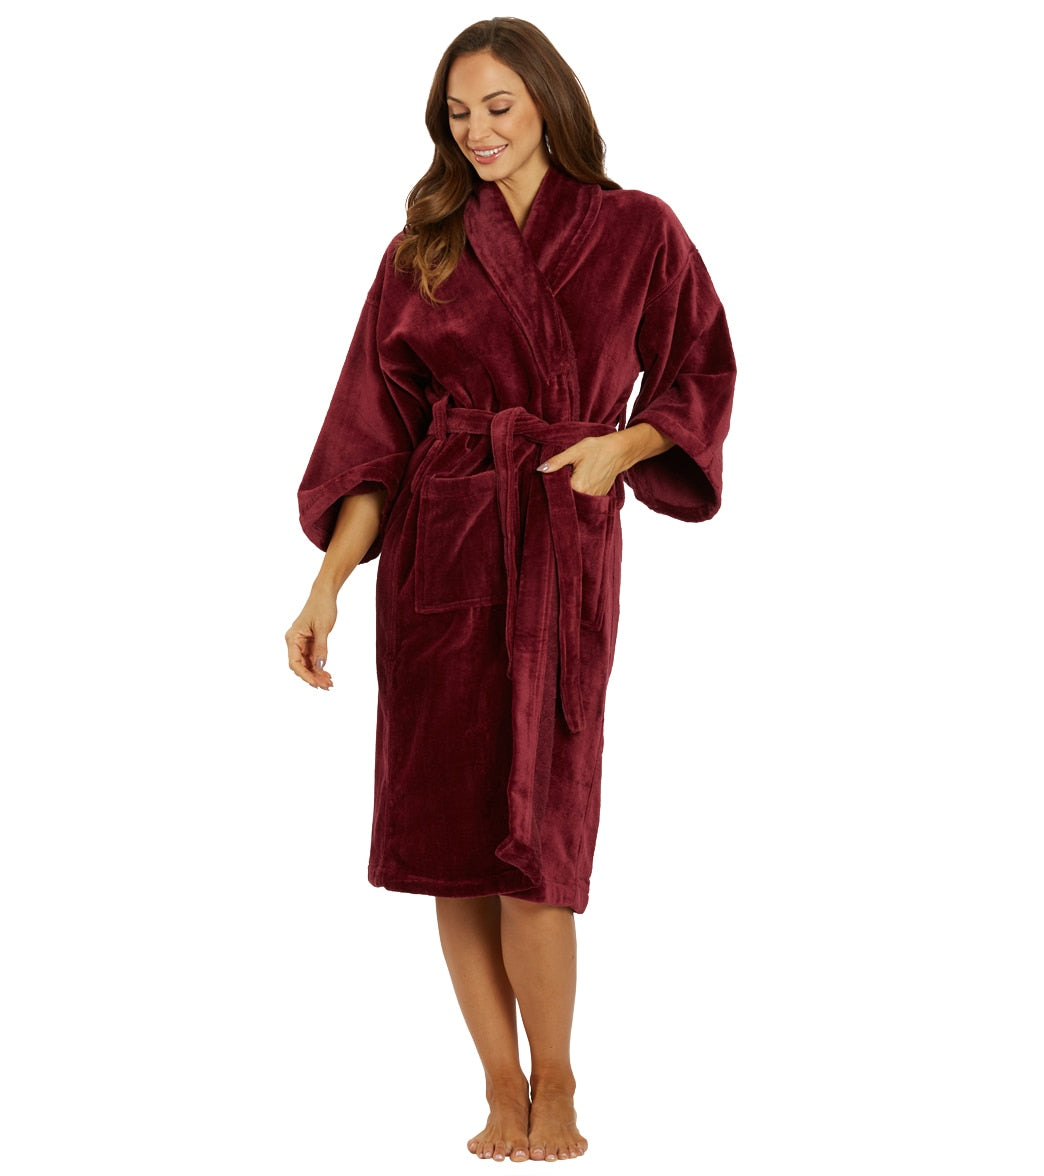 Camille Camille Women's Hooded Bathrobe in Burgundy Fleece Ladies Dressing  Gown - Camille from Camille Lingerie UK